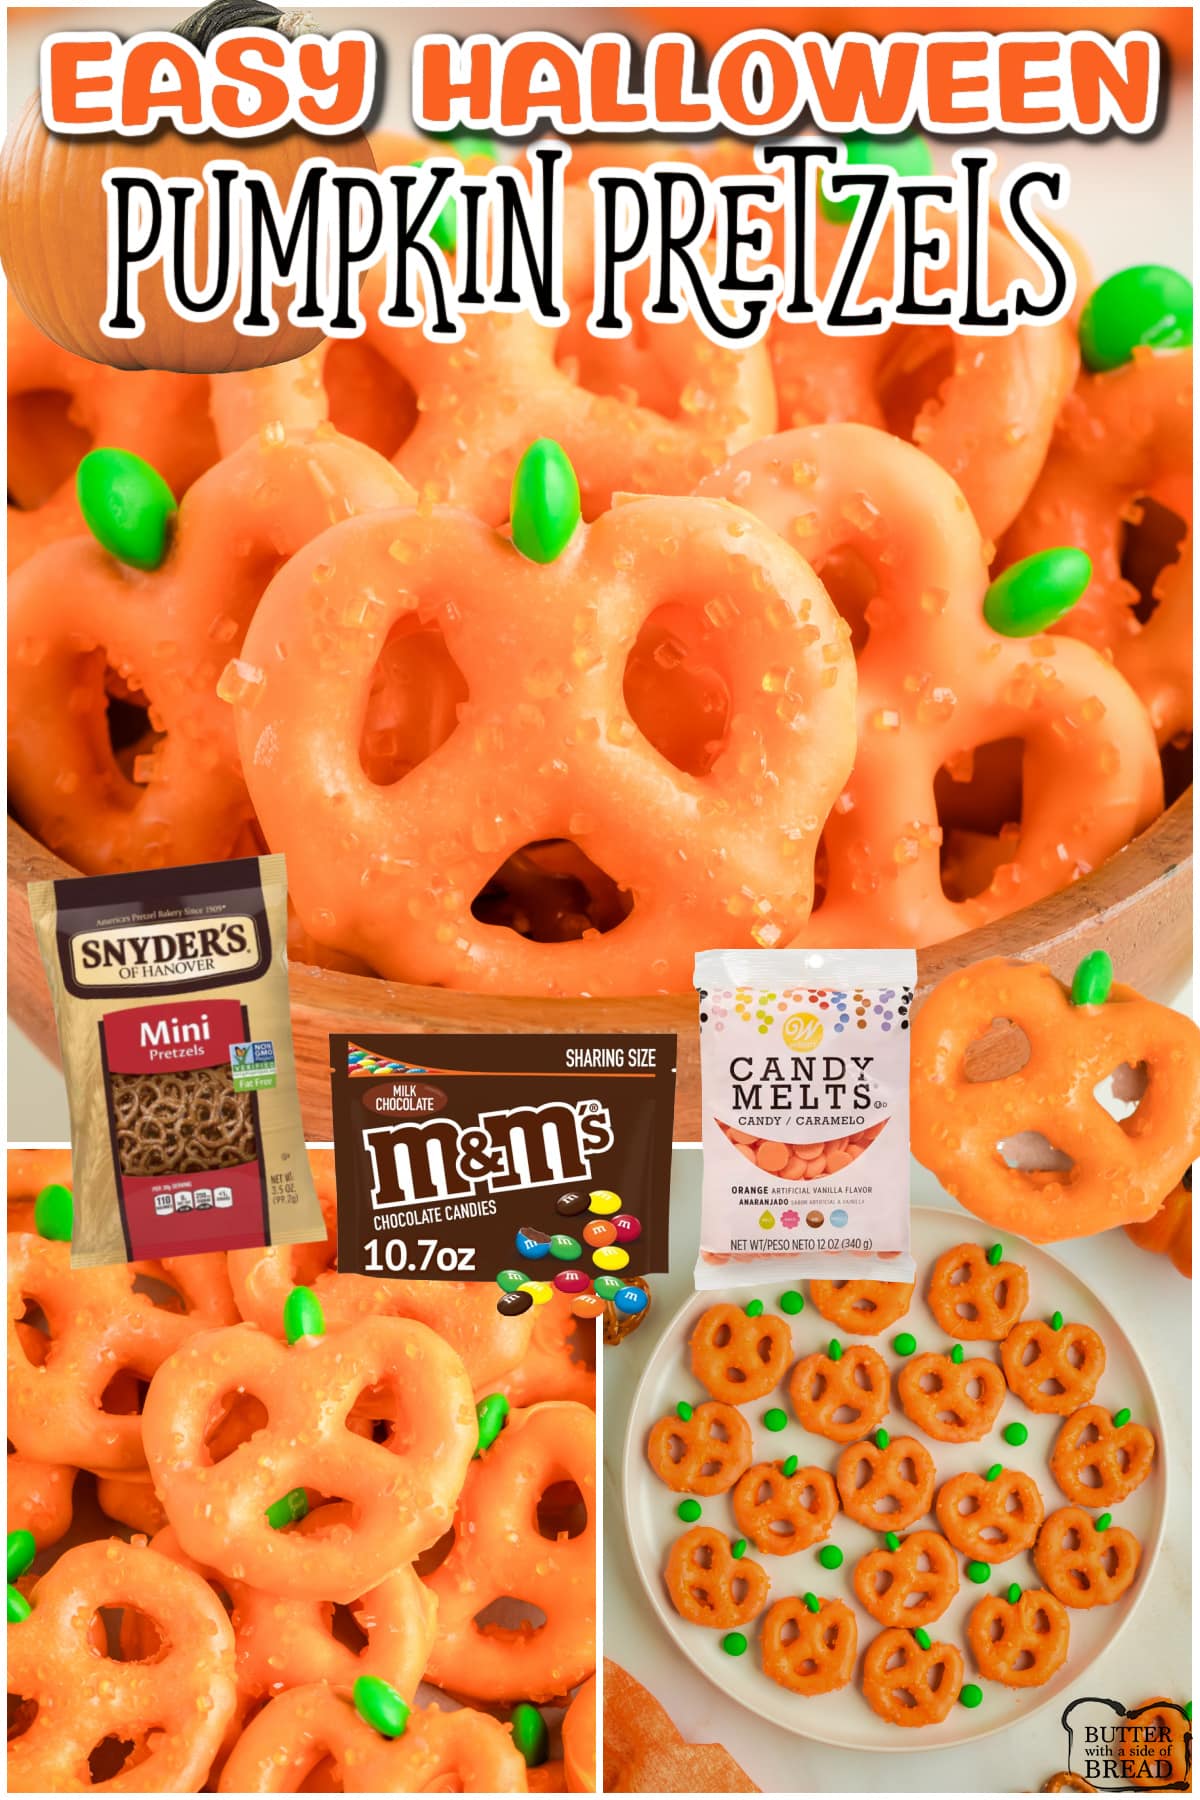 Easy Pumpkin Pretzels are orange chocolate covered pretzels that look like cute pumpkins! Chocolate covered pretzels for Halloween are fun & festive treats for your Fall party!